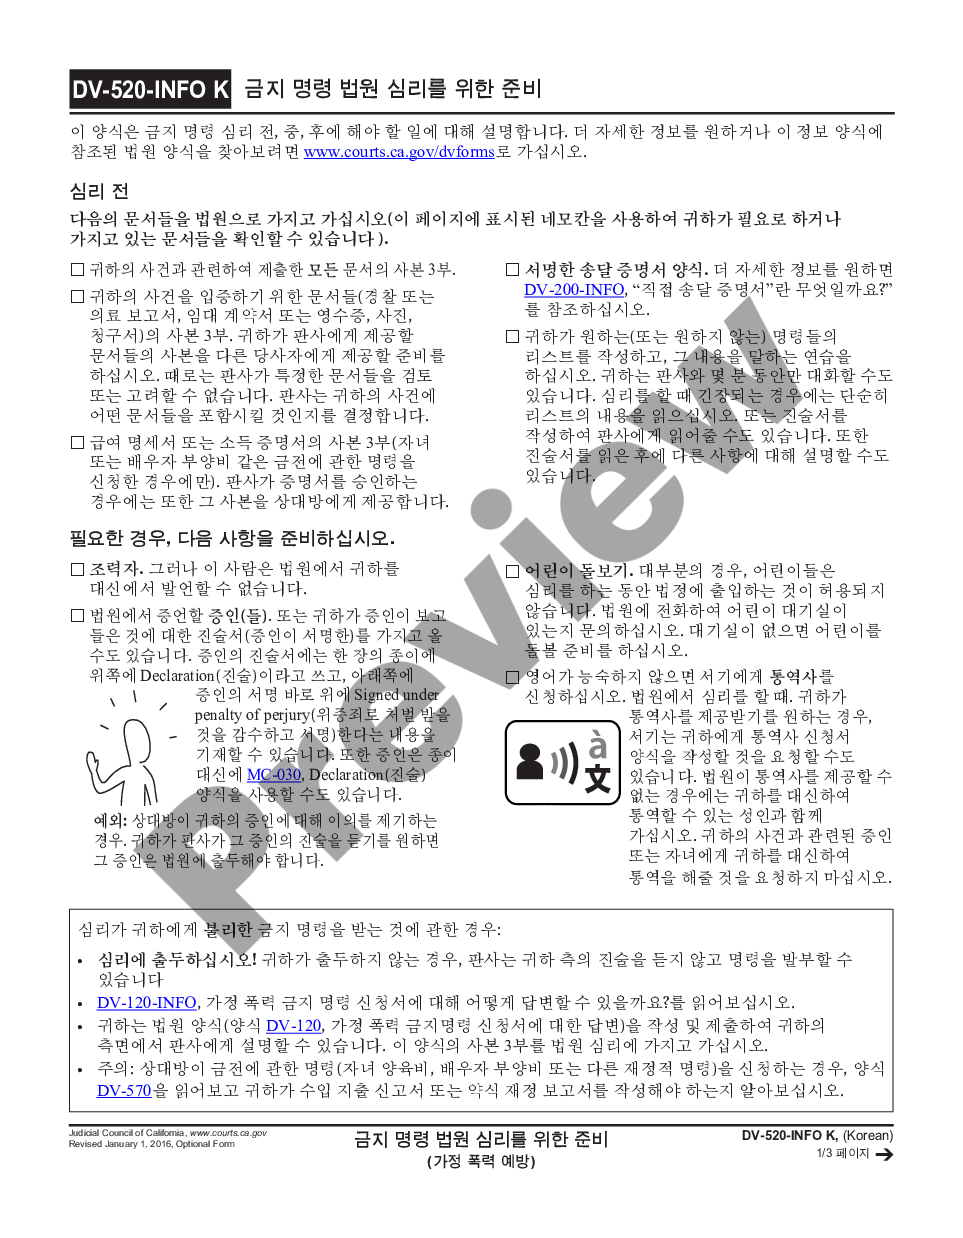 page 0 Get Ready for Your Hearing - For Protected Person - Domestic Violence Prevention - Korean preview